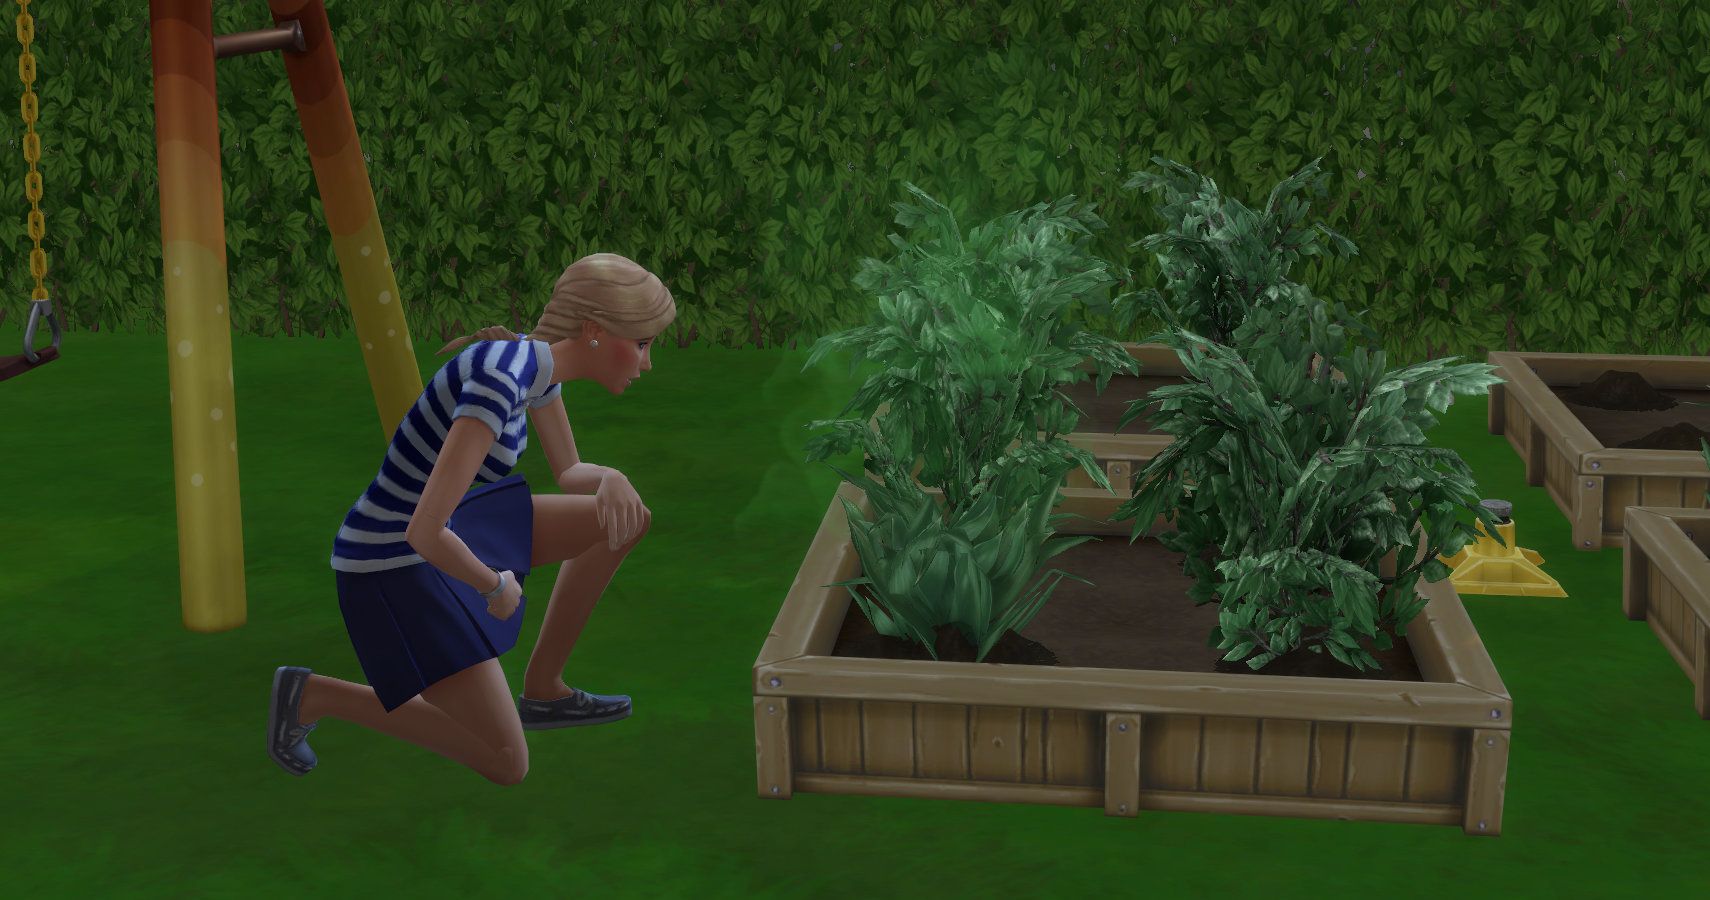 The Sims 4 Seasons Making Money With The Gardening Skill